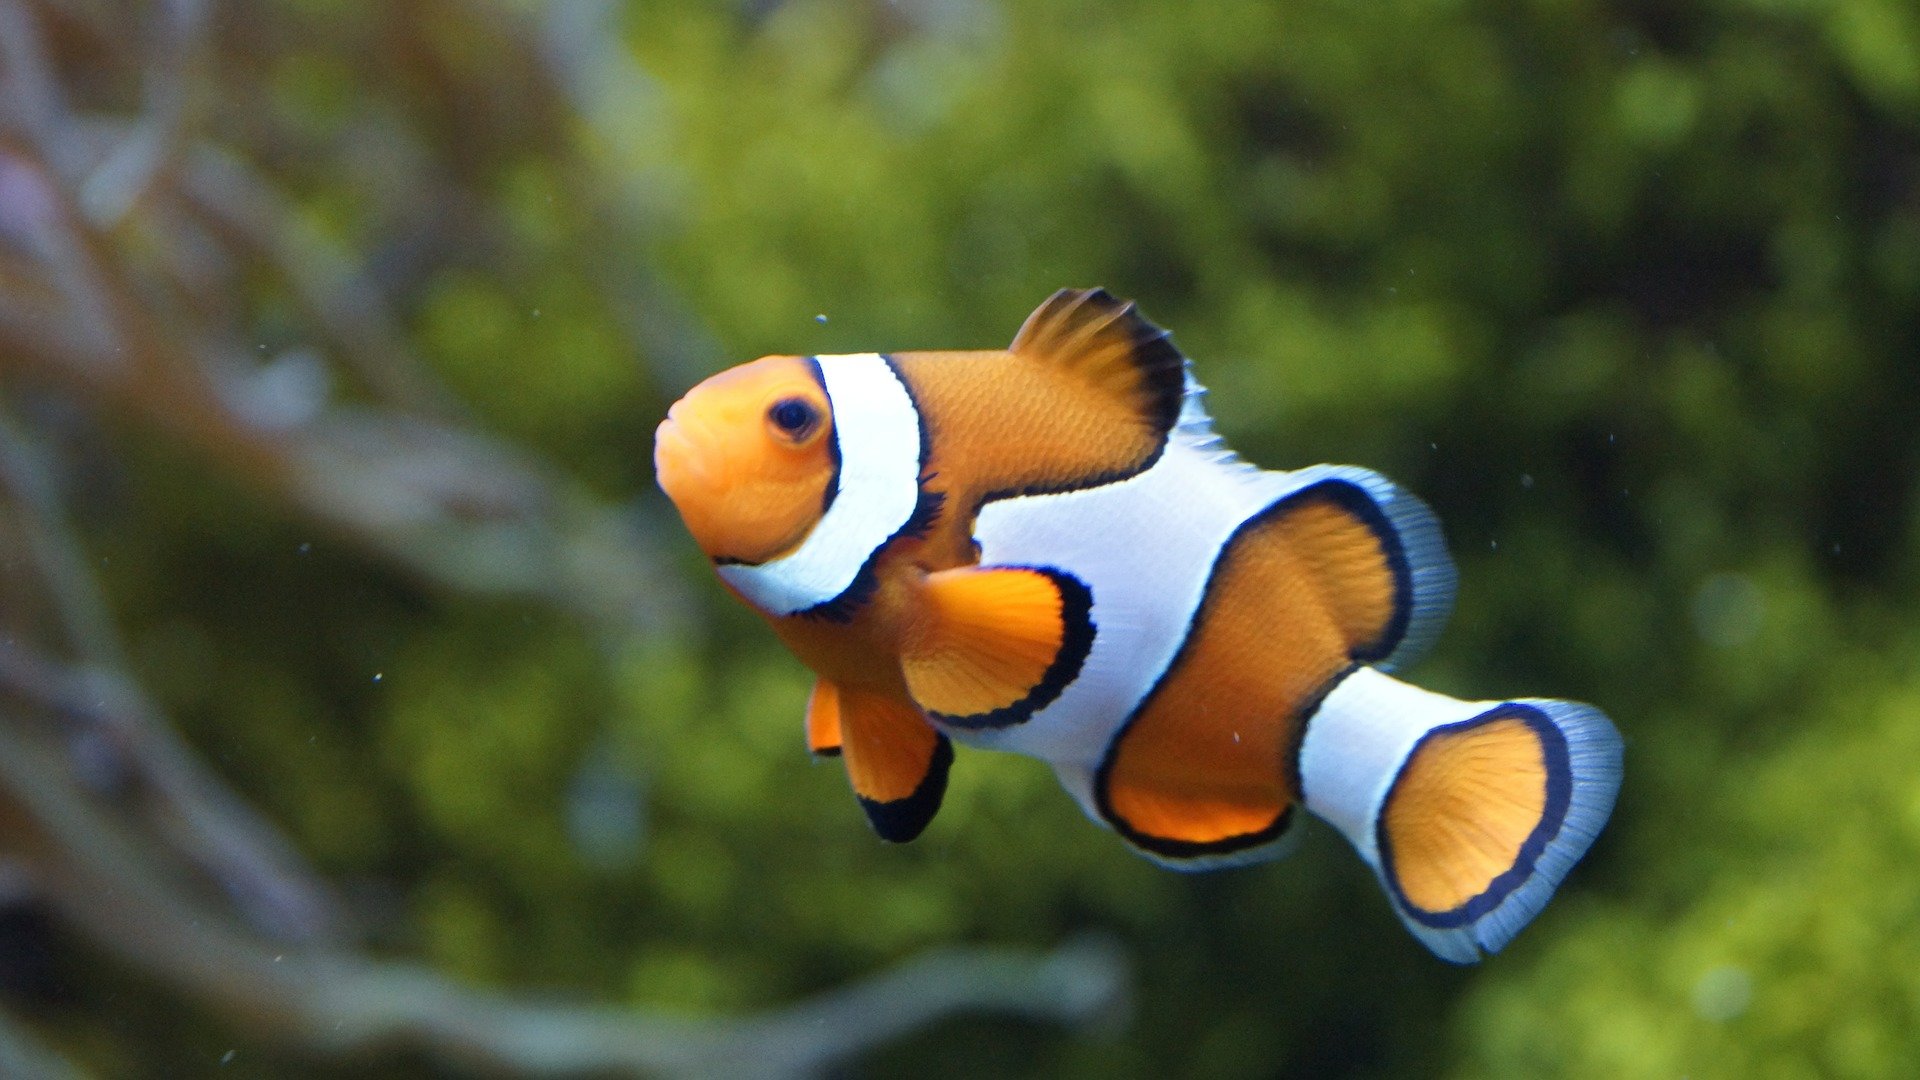 'The Nemo effect' is untrue: Animal movies promote awareness, not harm, say researchers